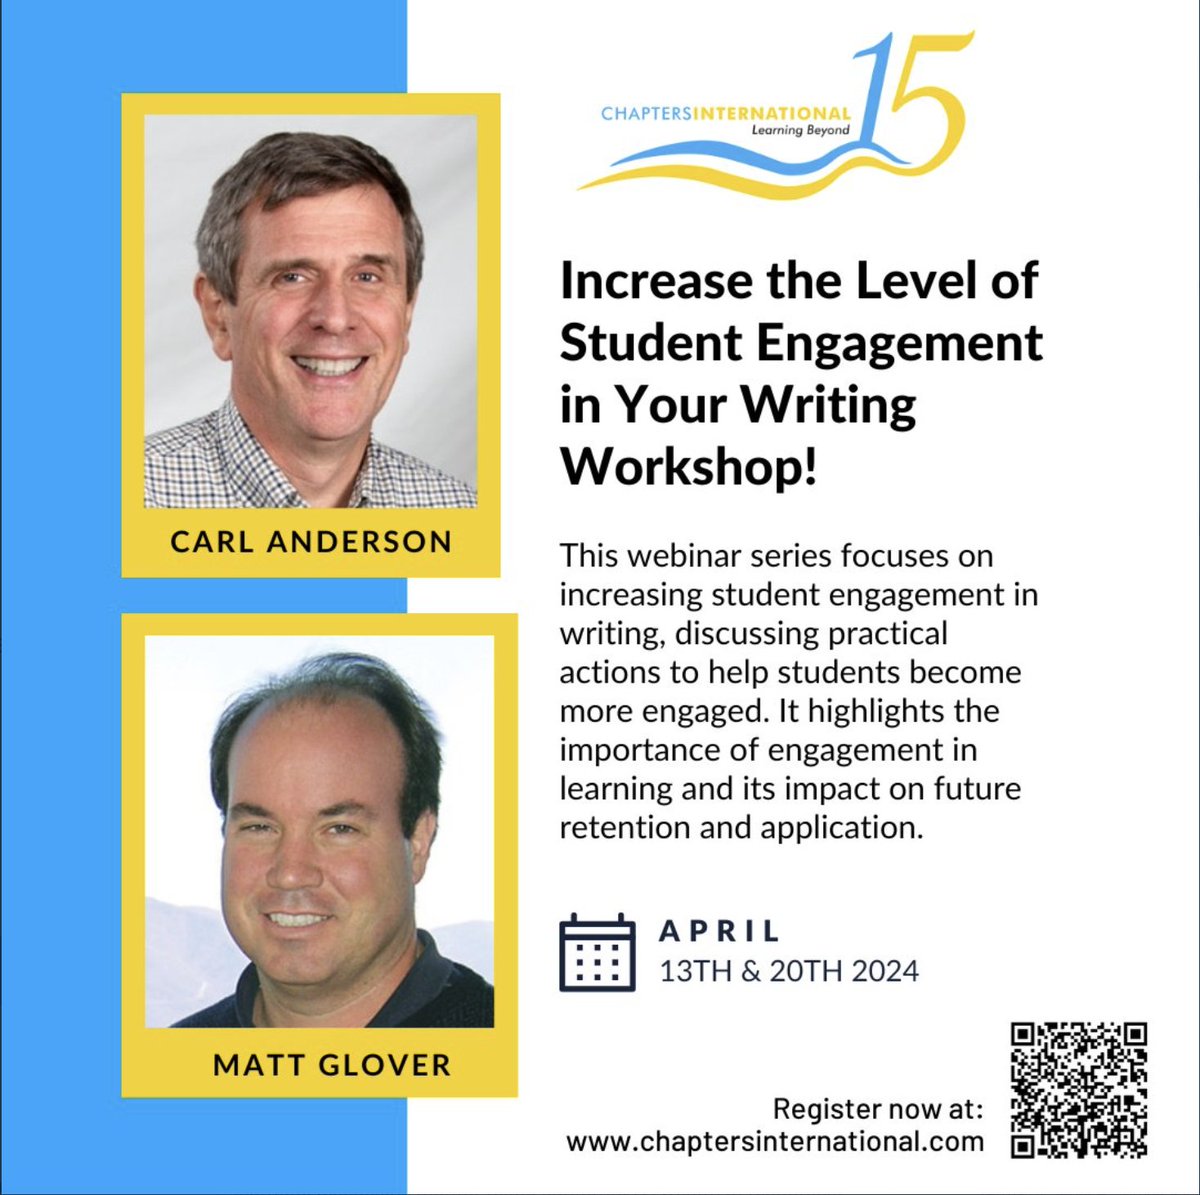 This weekend and next, join @Mattglover123 and me for a @ChaptersInt webinar on increasing student engagement in writing. April 13th & 20th. Details: chaptersinternational.com/mailer/carl_ma…